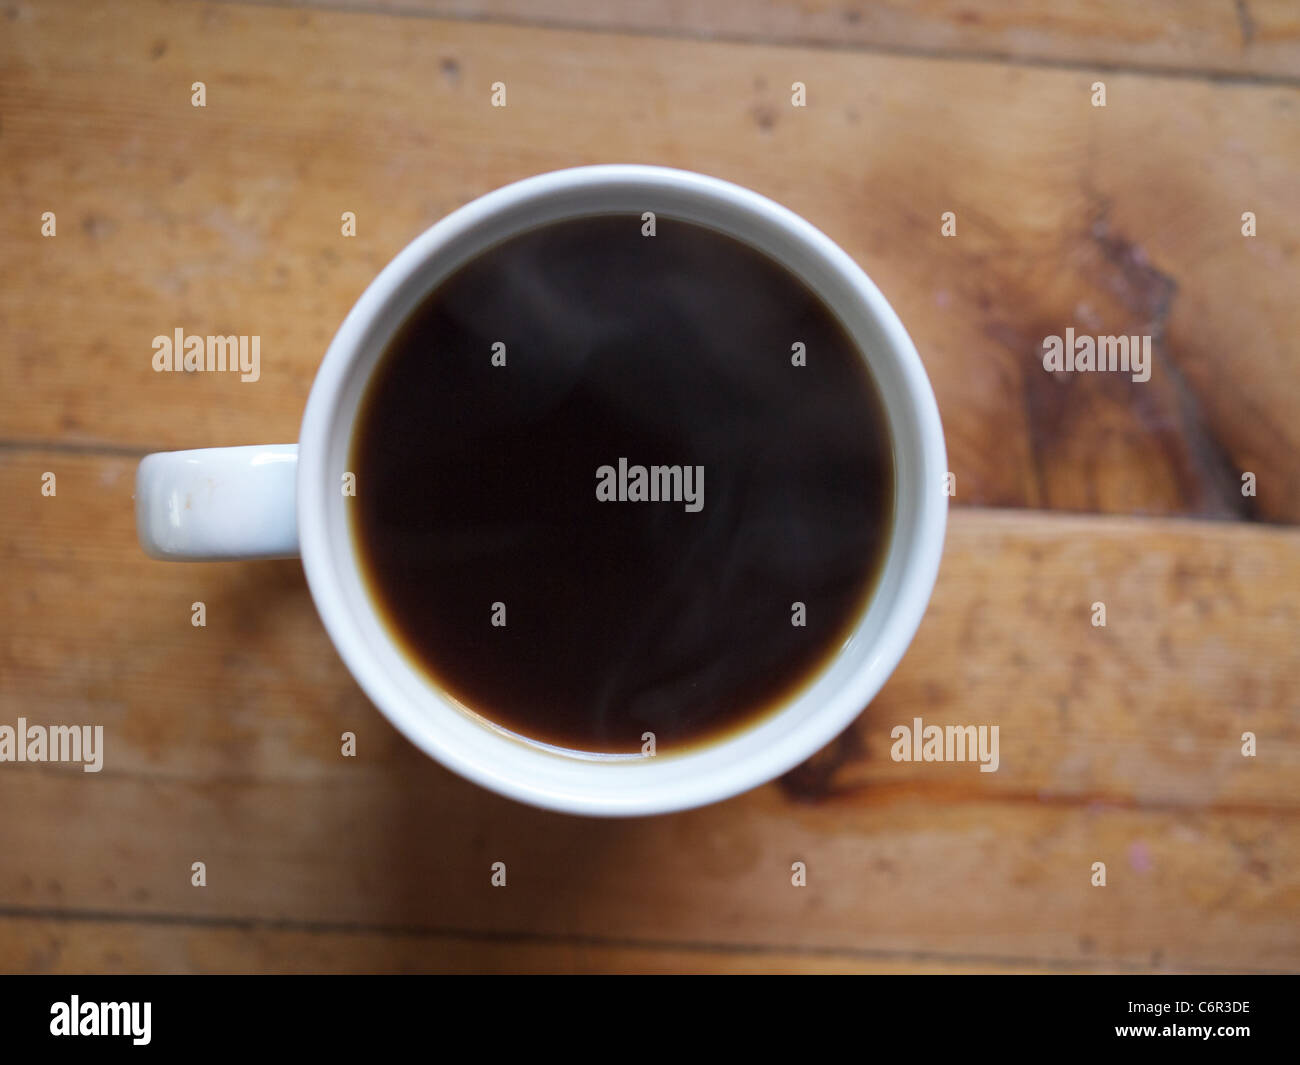 Black Coffee in a white cup on a wooden table Stock Photo